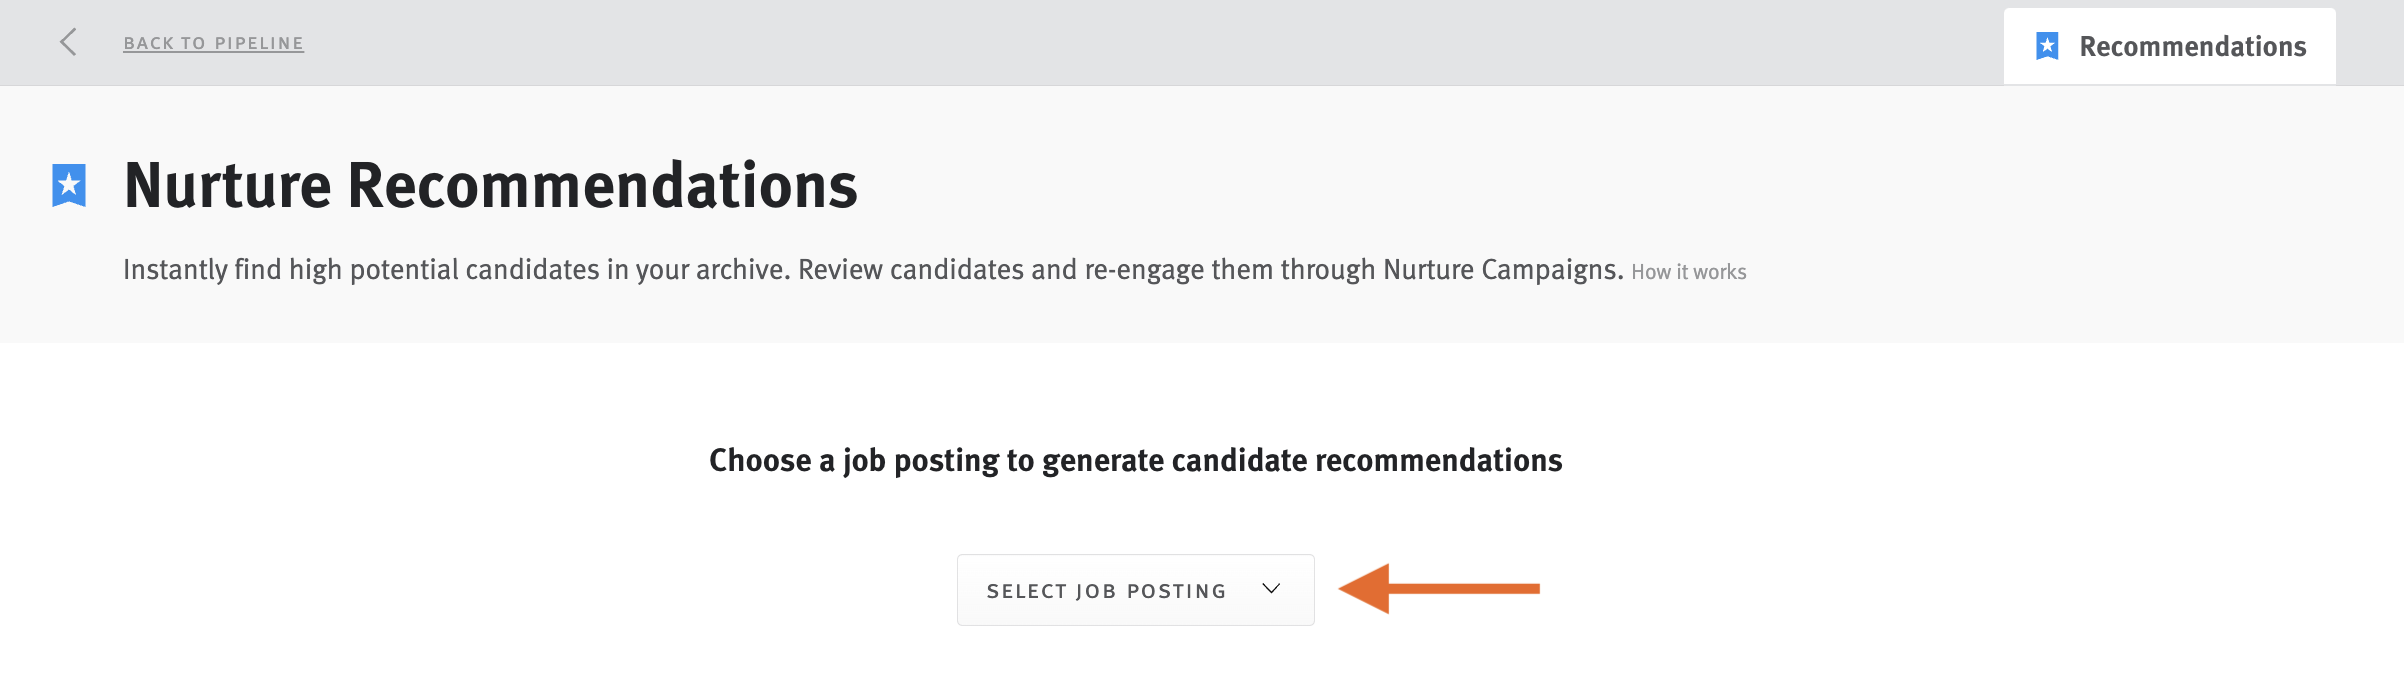 Nurture recommendations window with arrow pointing to select job posting